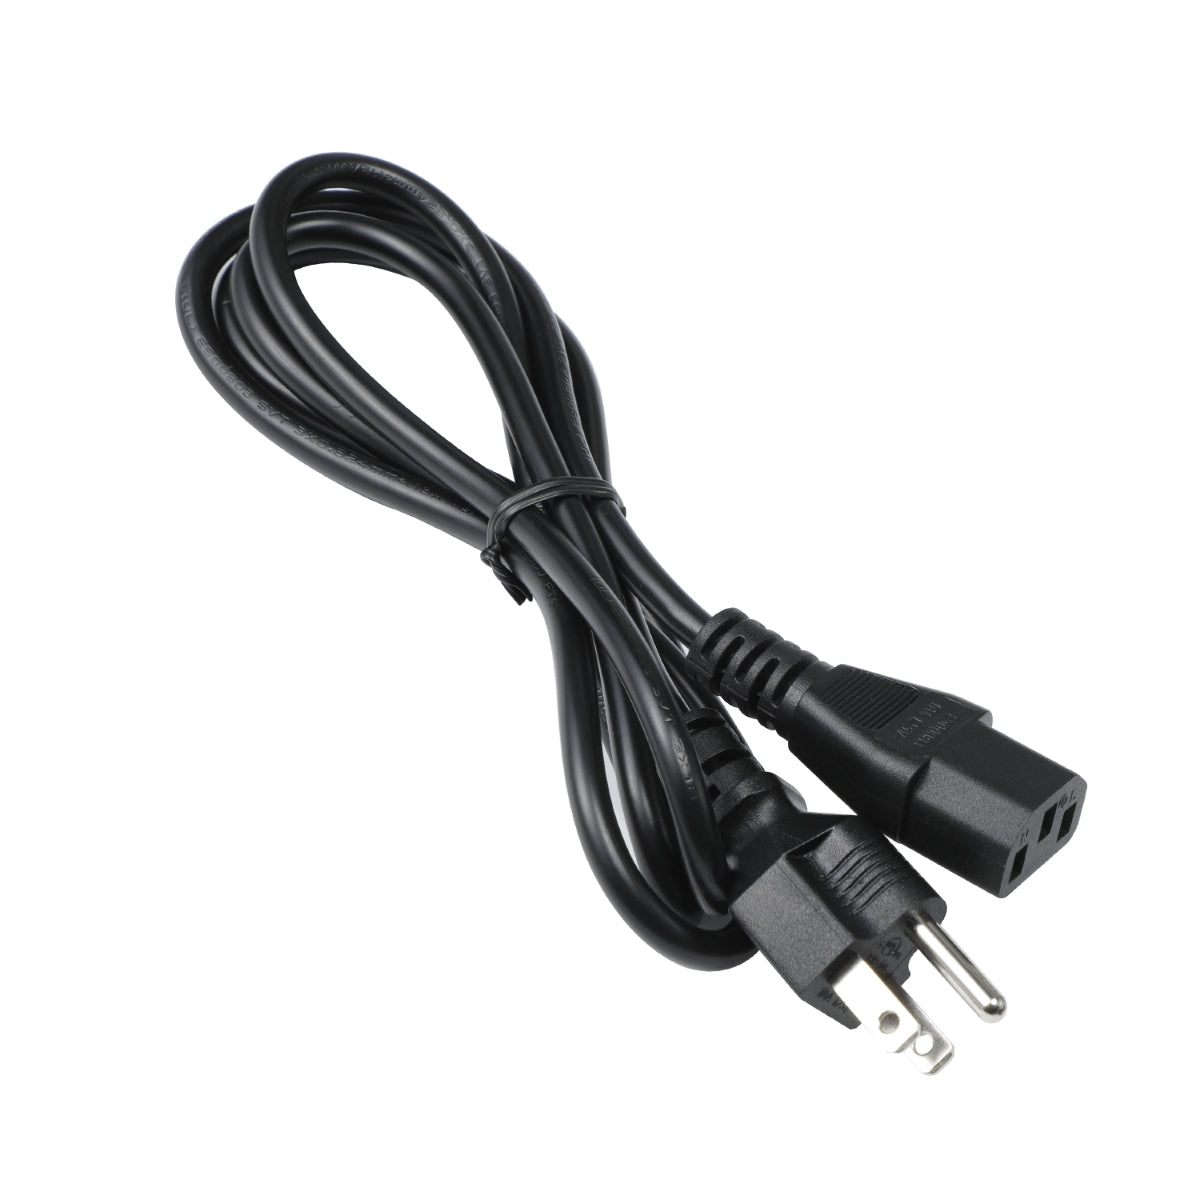 Power Cord for HP Pavilion 550-192 Computer.